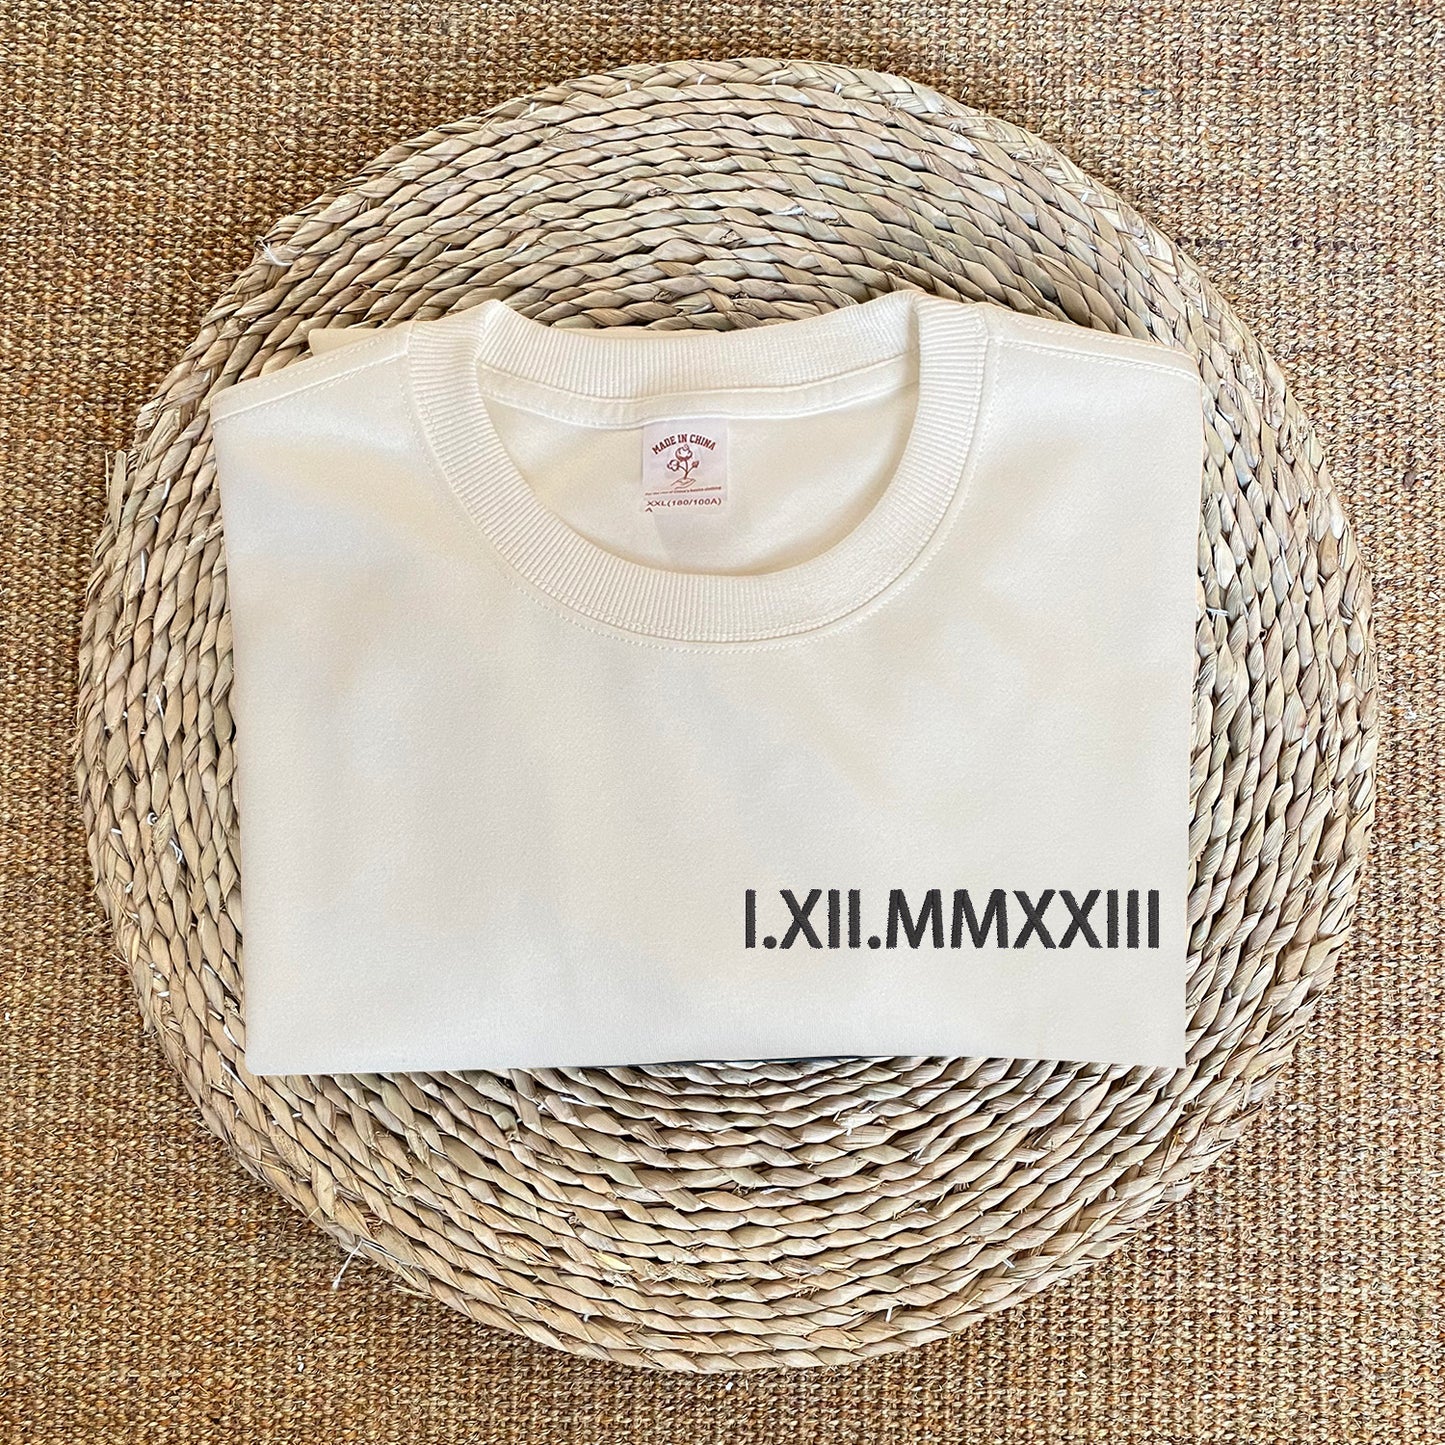 Roman Numeral Chic: Tailor-Made Embroidered Sweatshirt for You